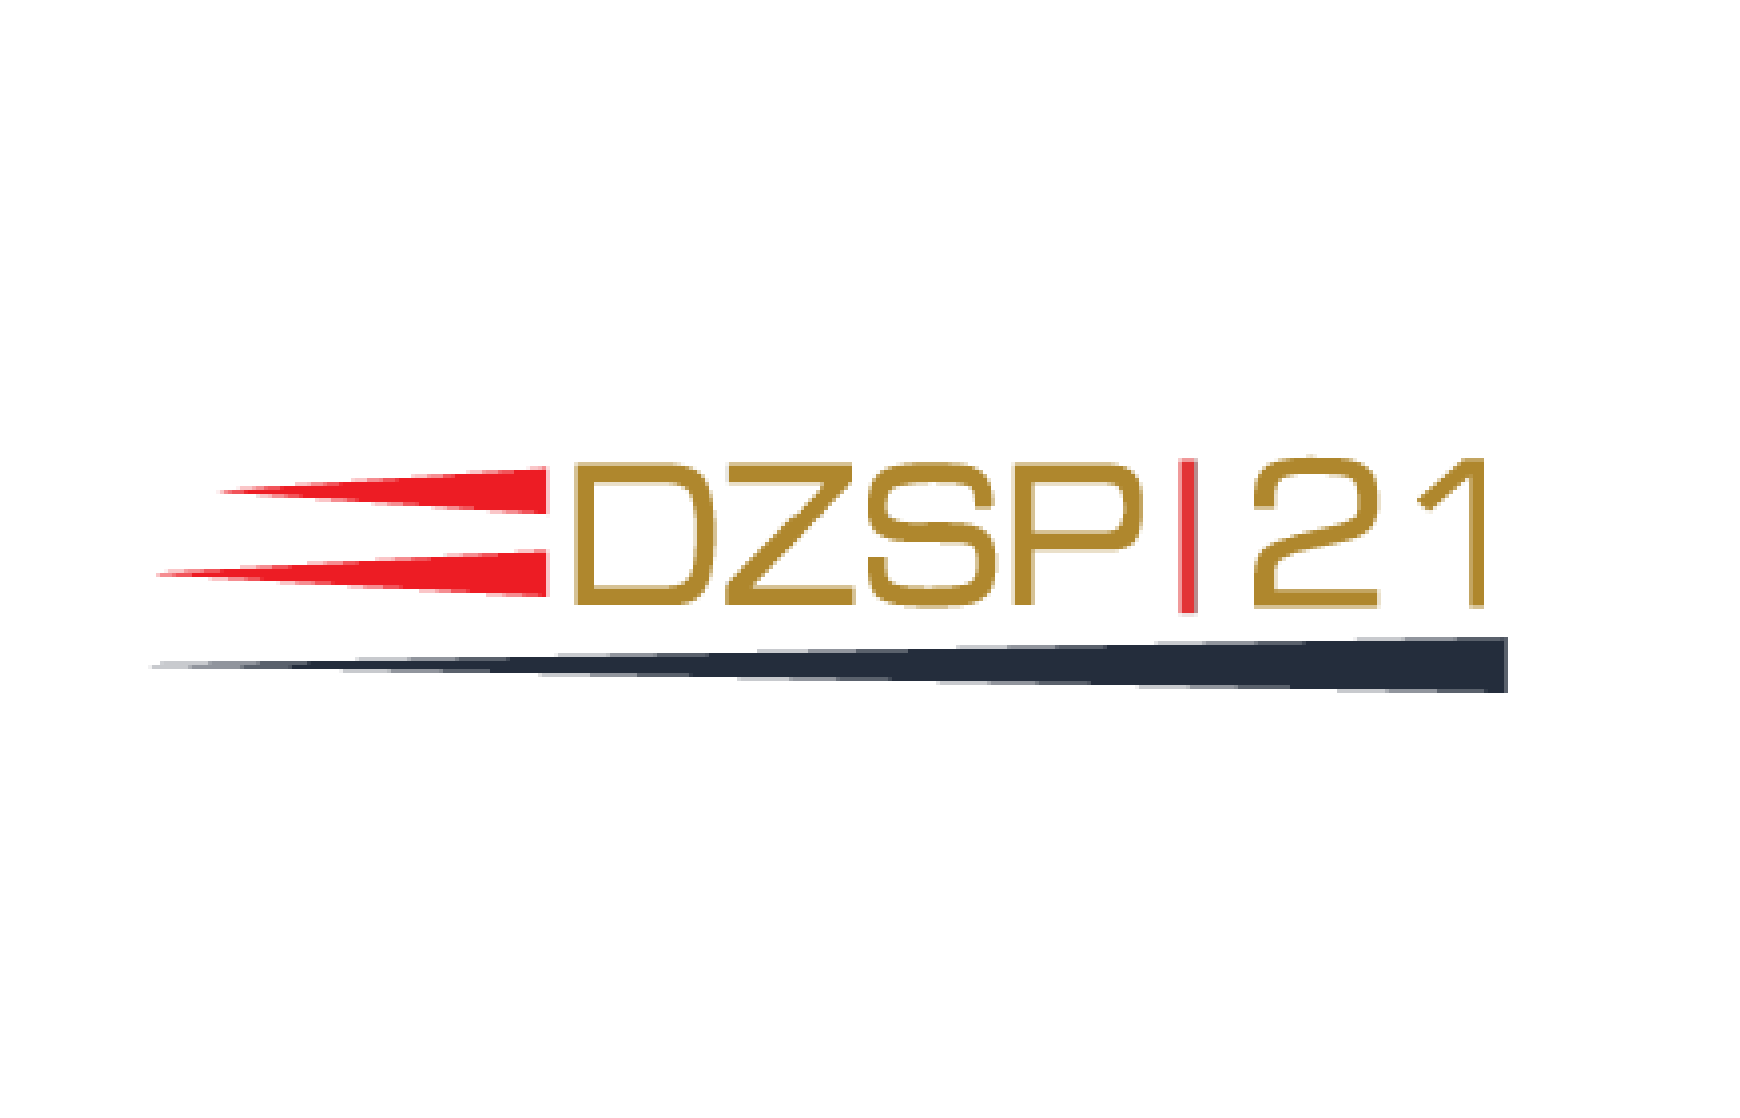 Logo of the company DZSP21 who is a client of Precision Talent Solutions.